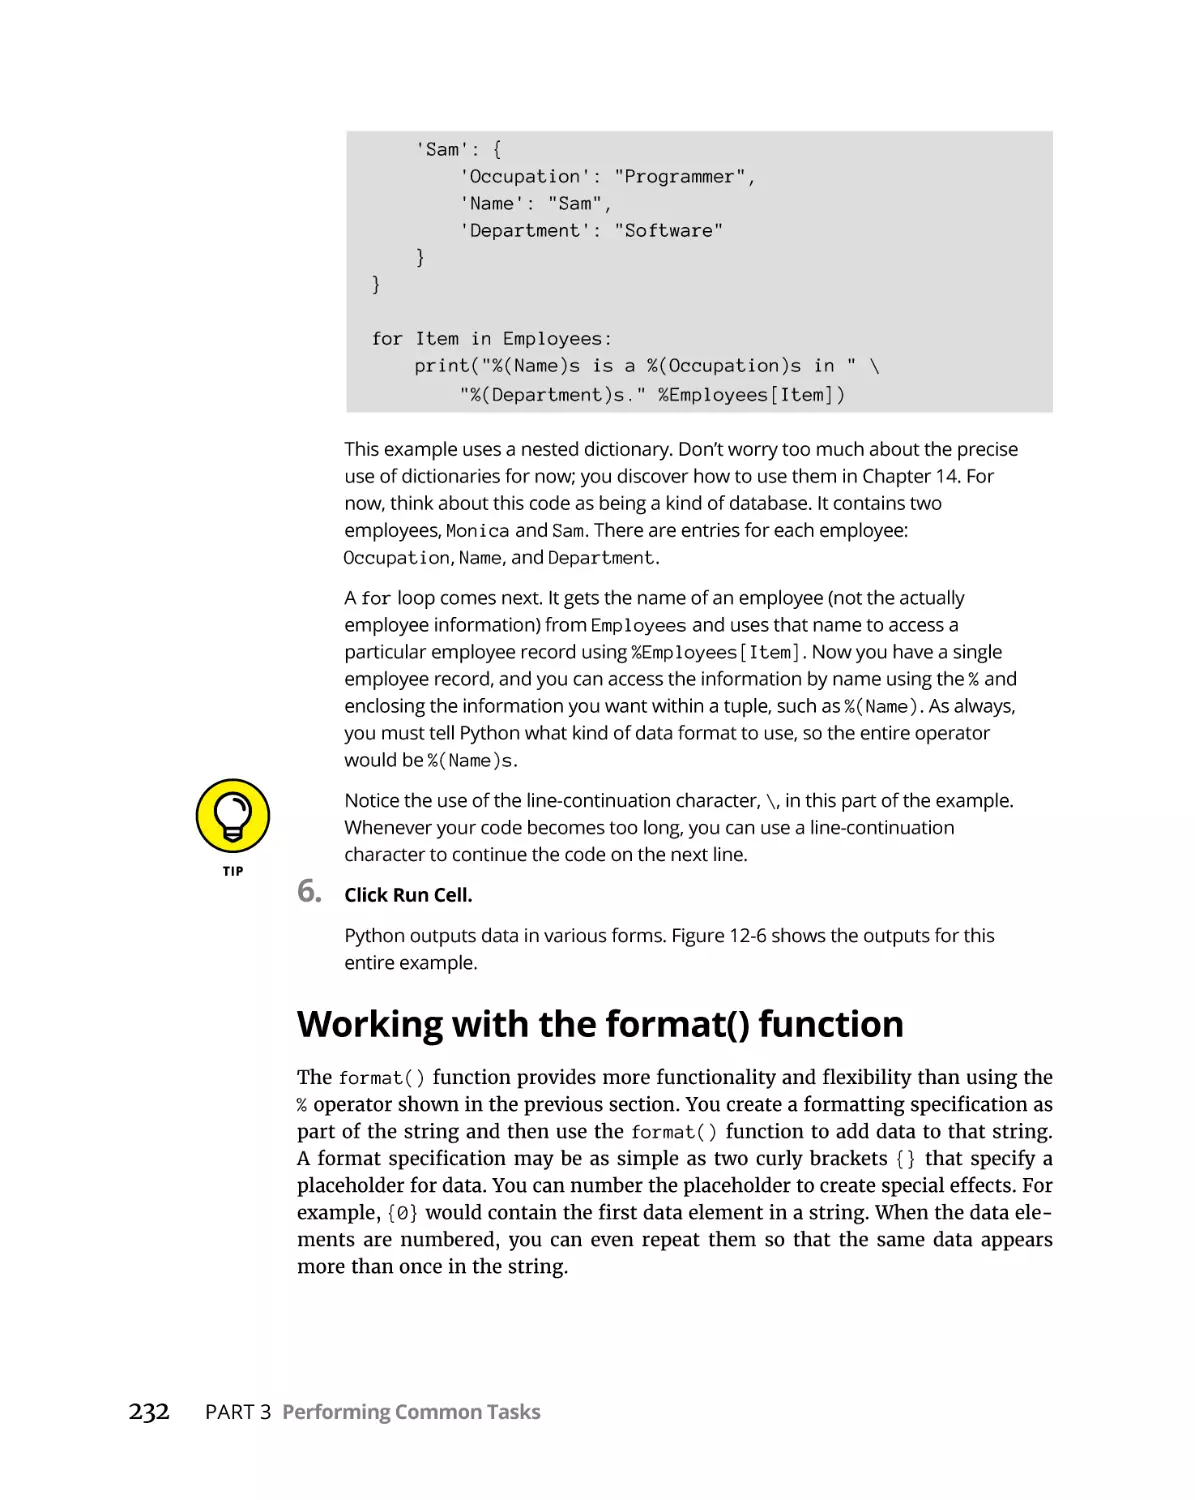 Working with the format() function